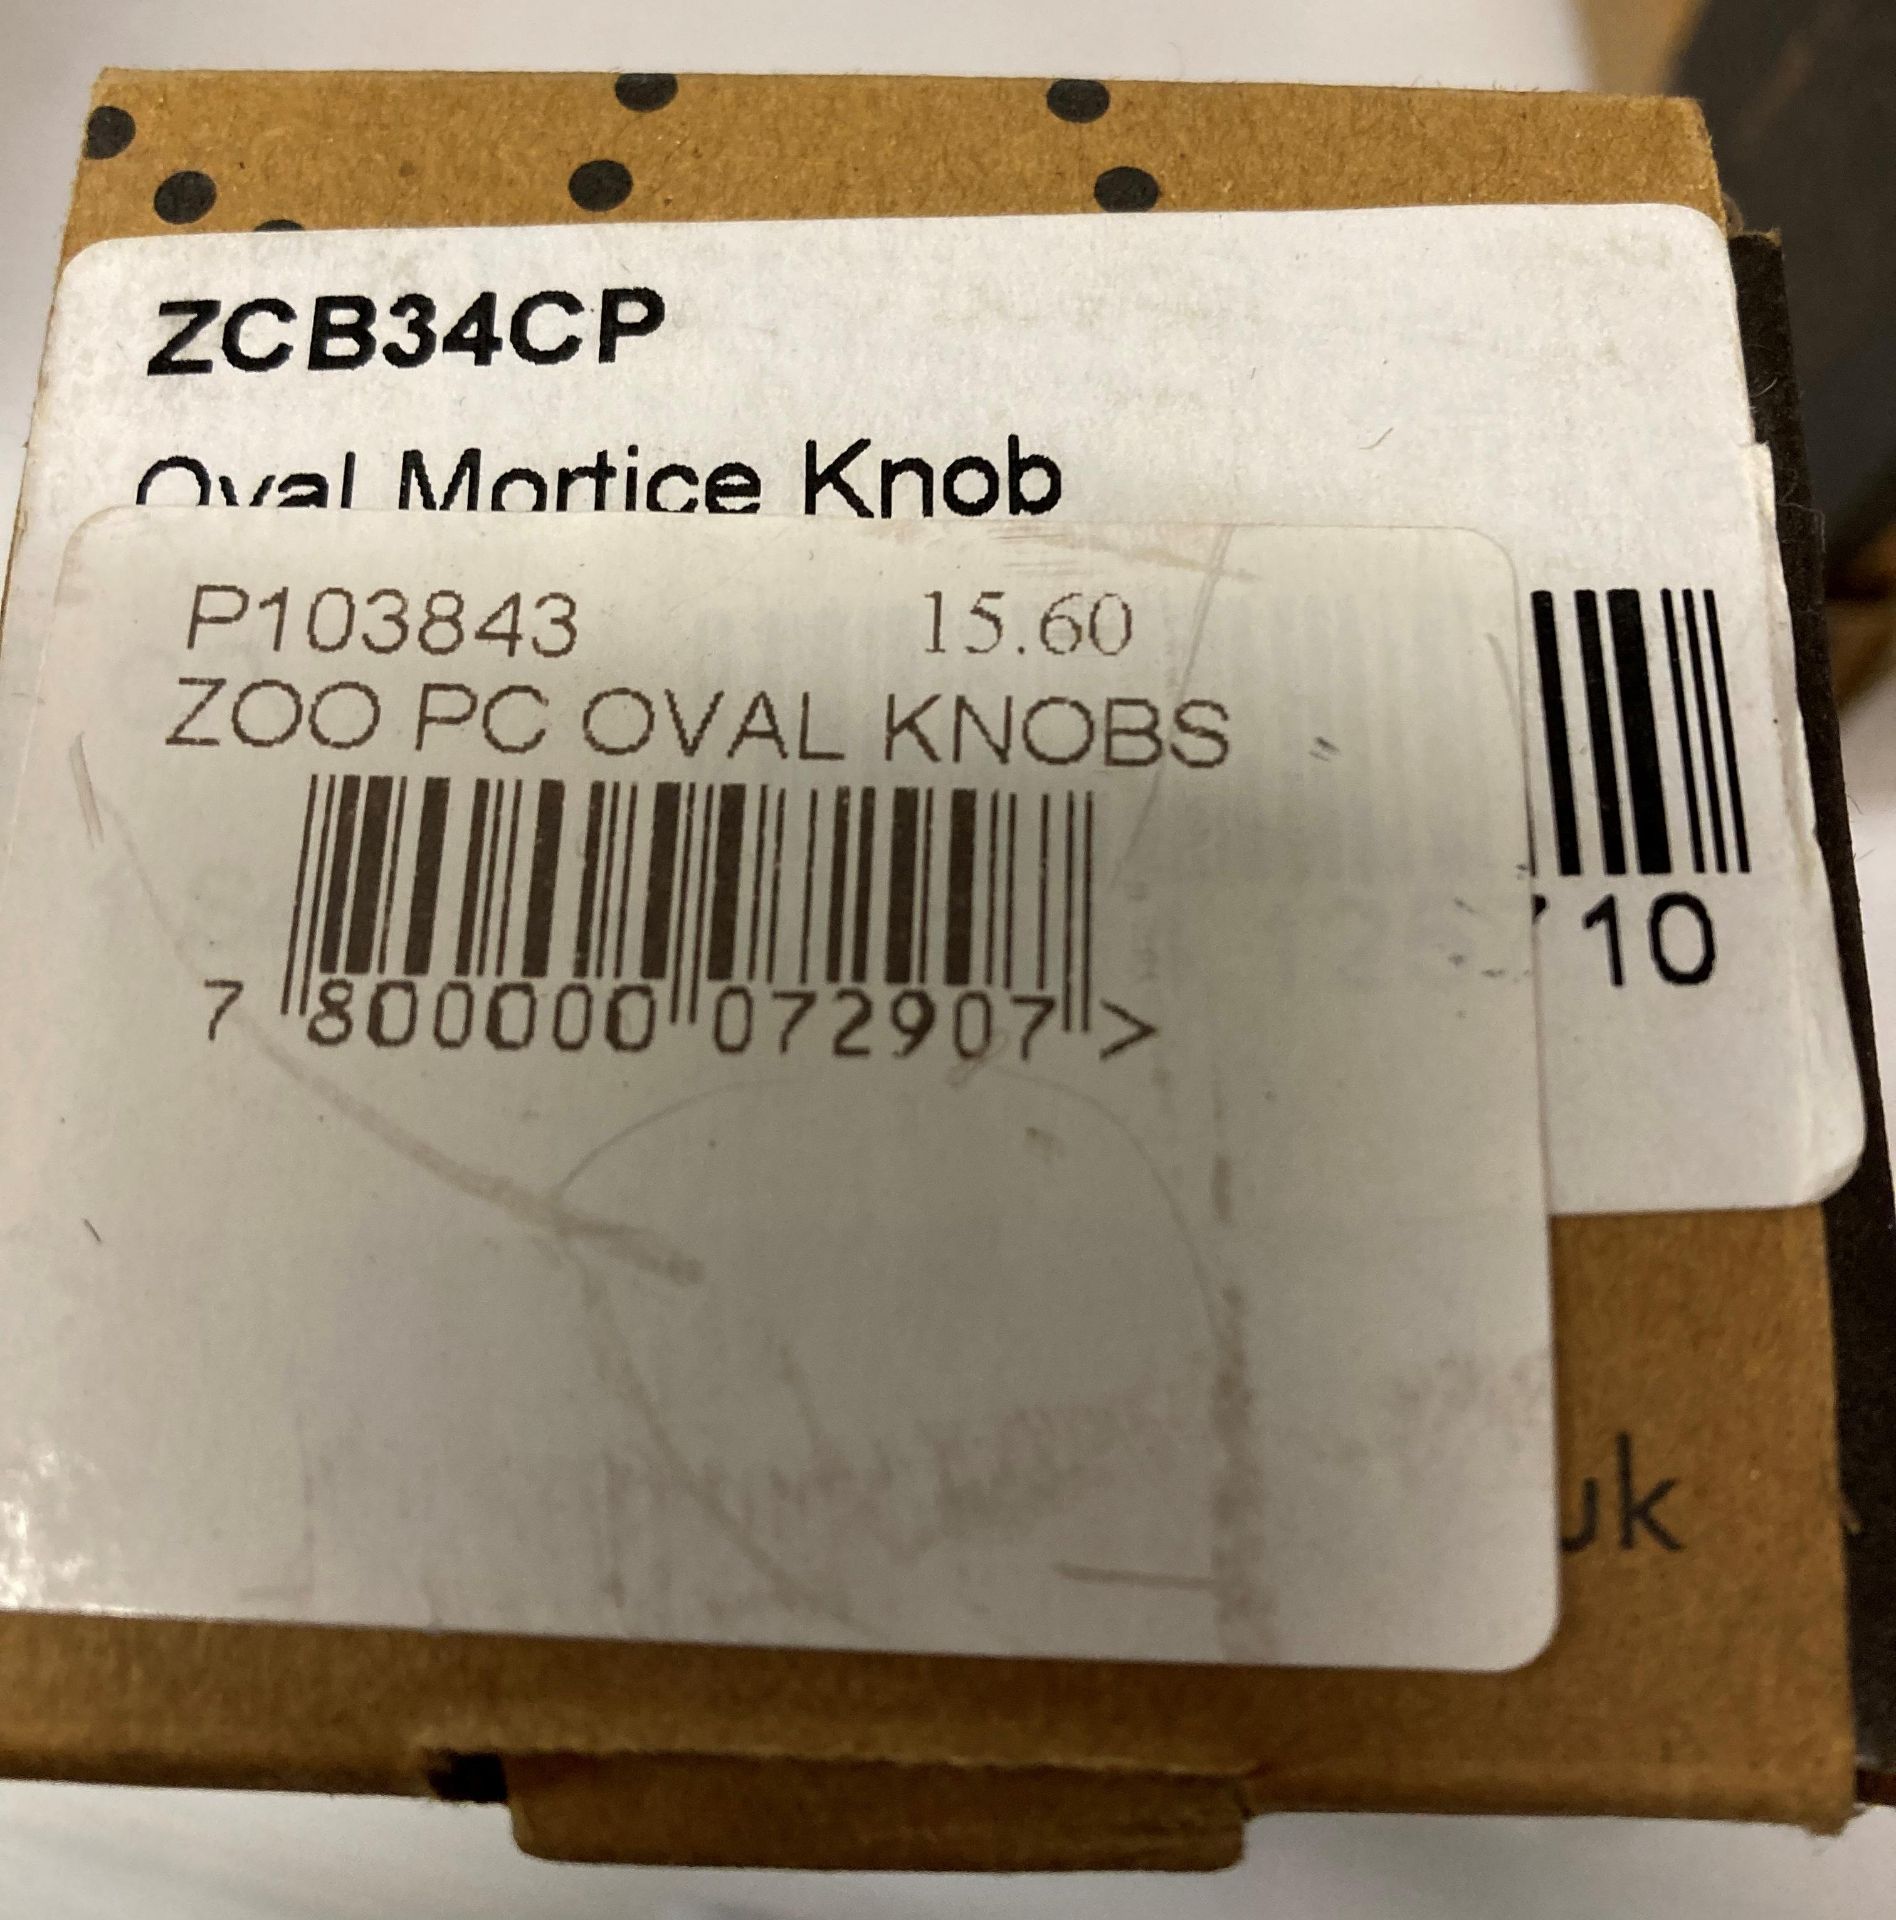 2 x ZCB834CP ZCB Contract Brass oval mortice knobs in silver - both boxed and new (J13) - Image 2 of 2